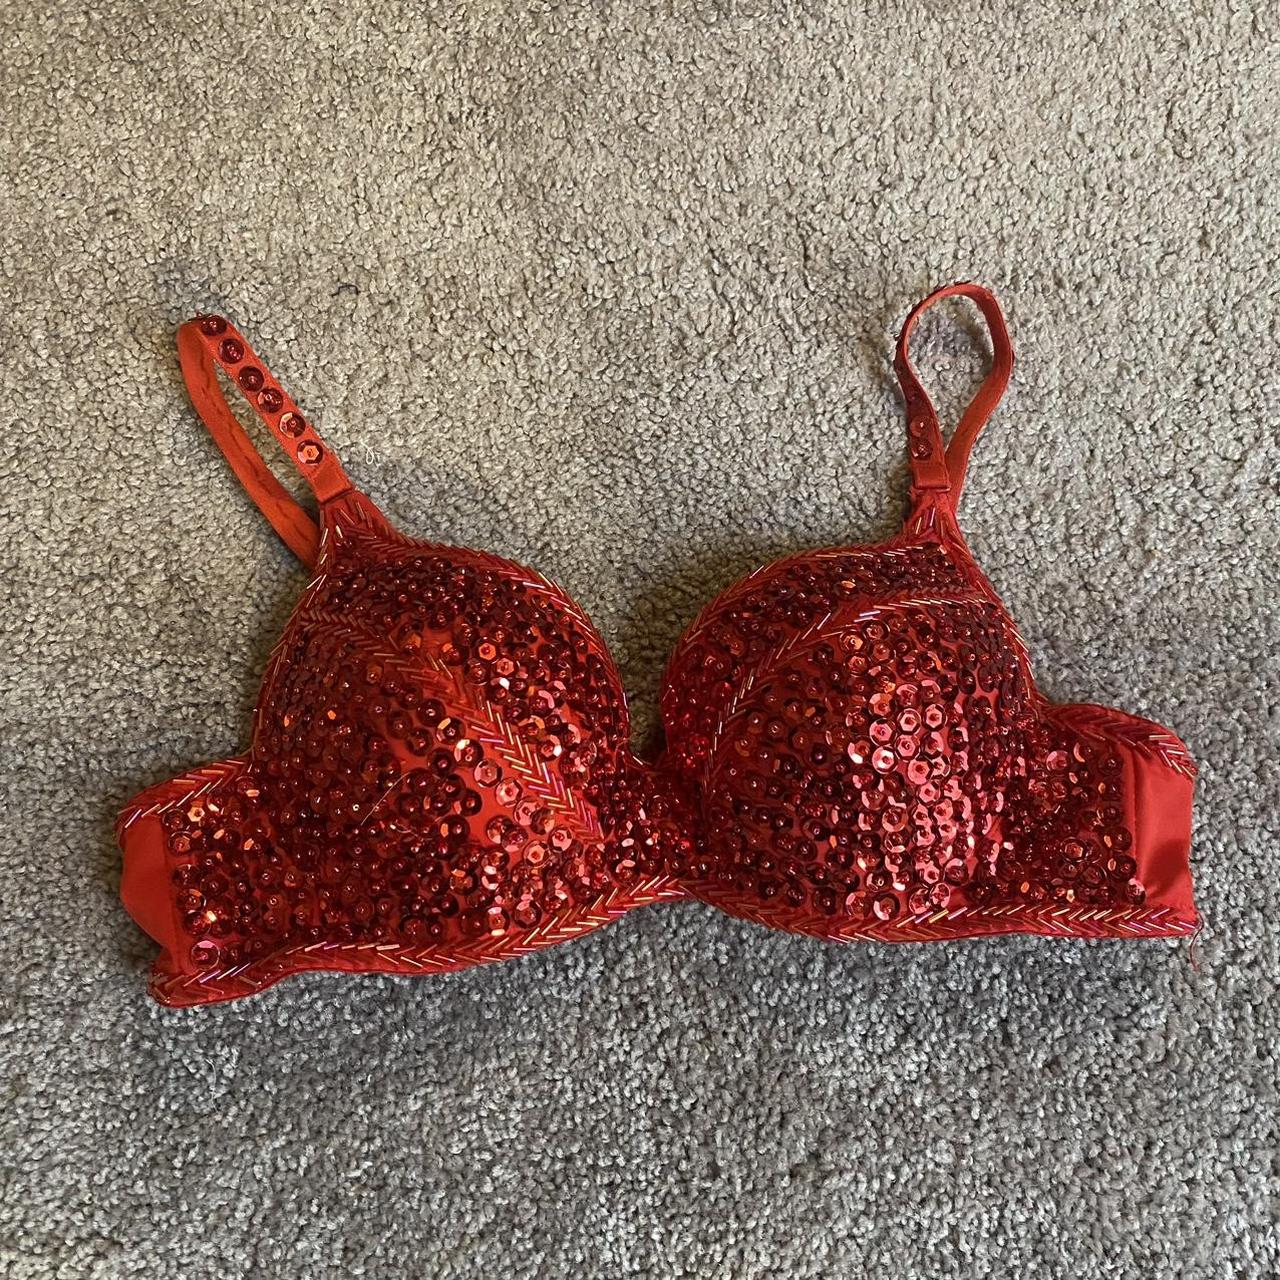 RED SPARKLY COSTUME BRA - roughly size 32-34 B extra - Depop